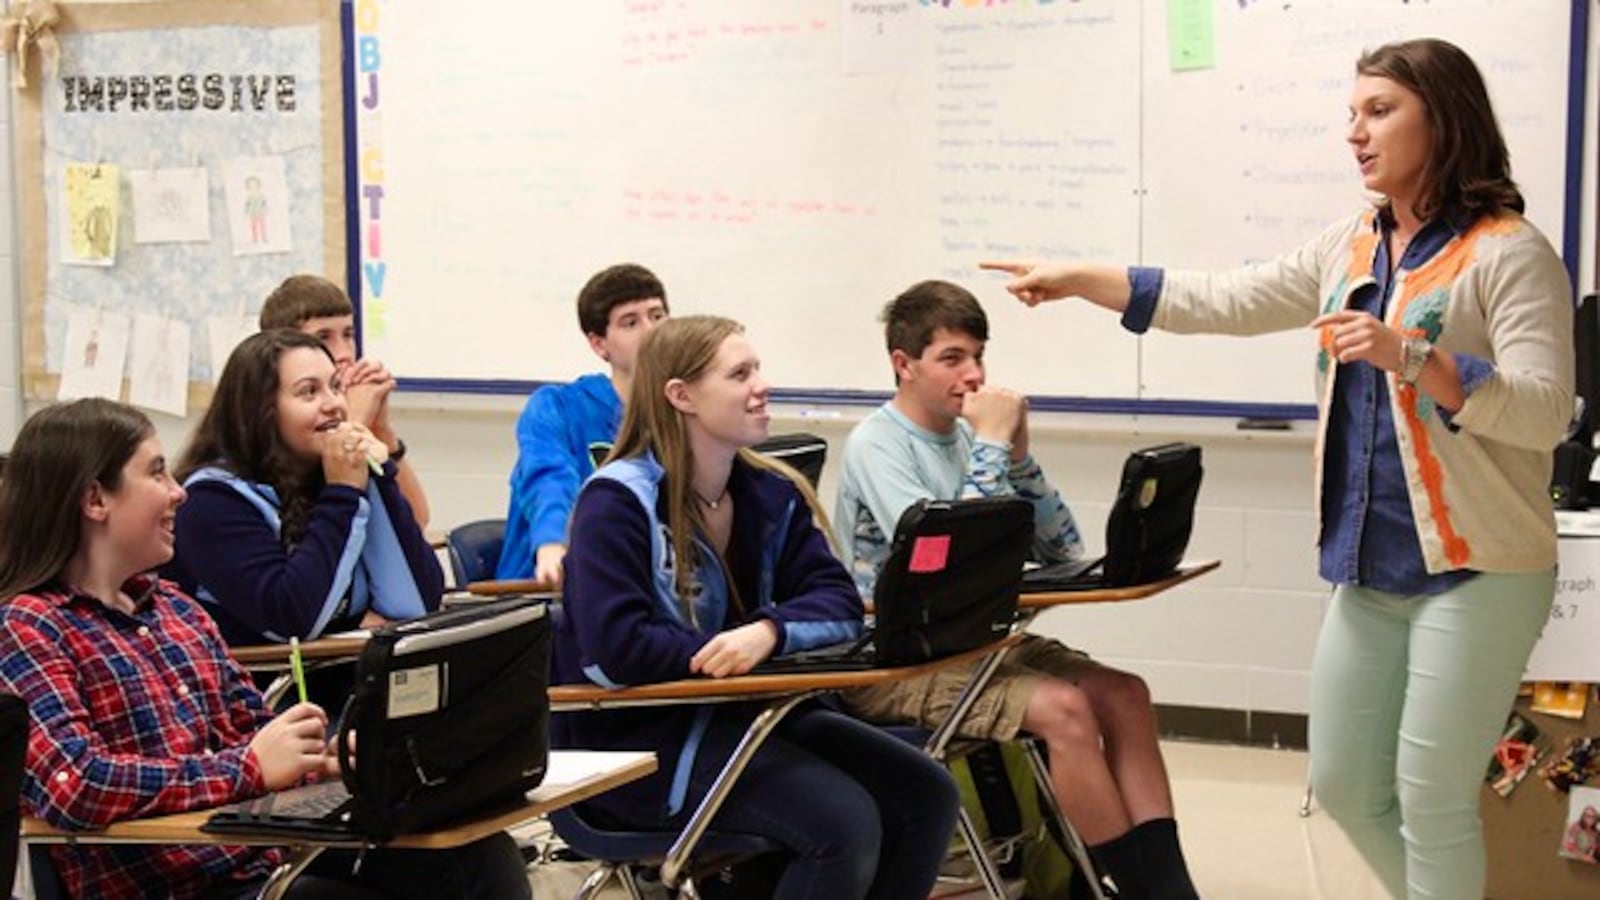 A teacher instructs students in a Tennessee classroom. (Photo courtesy of Tennessee Department of Education)